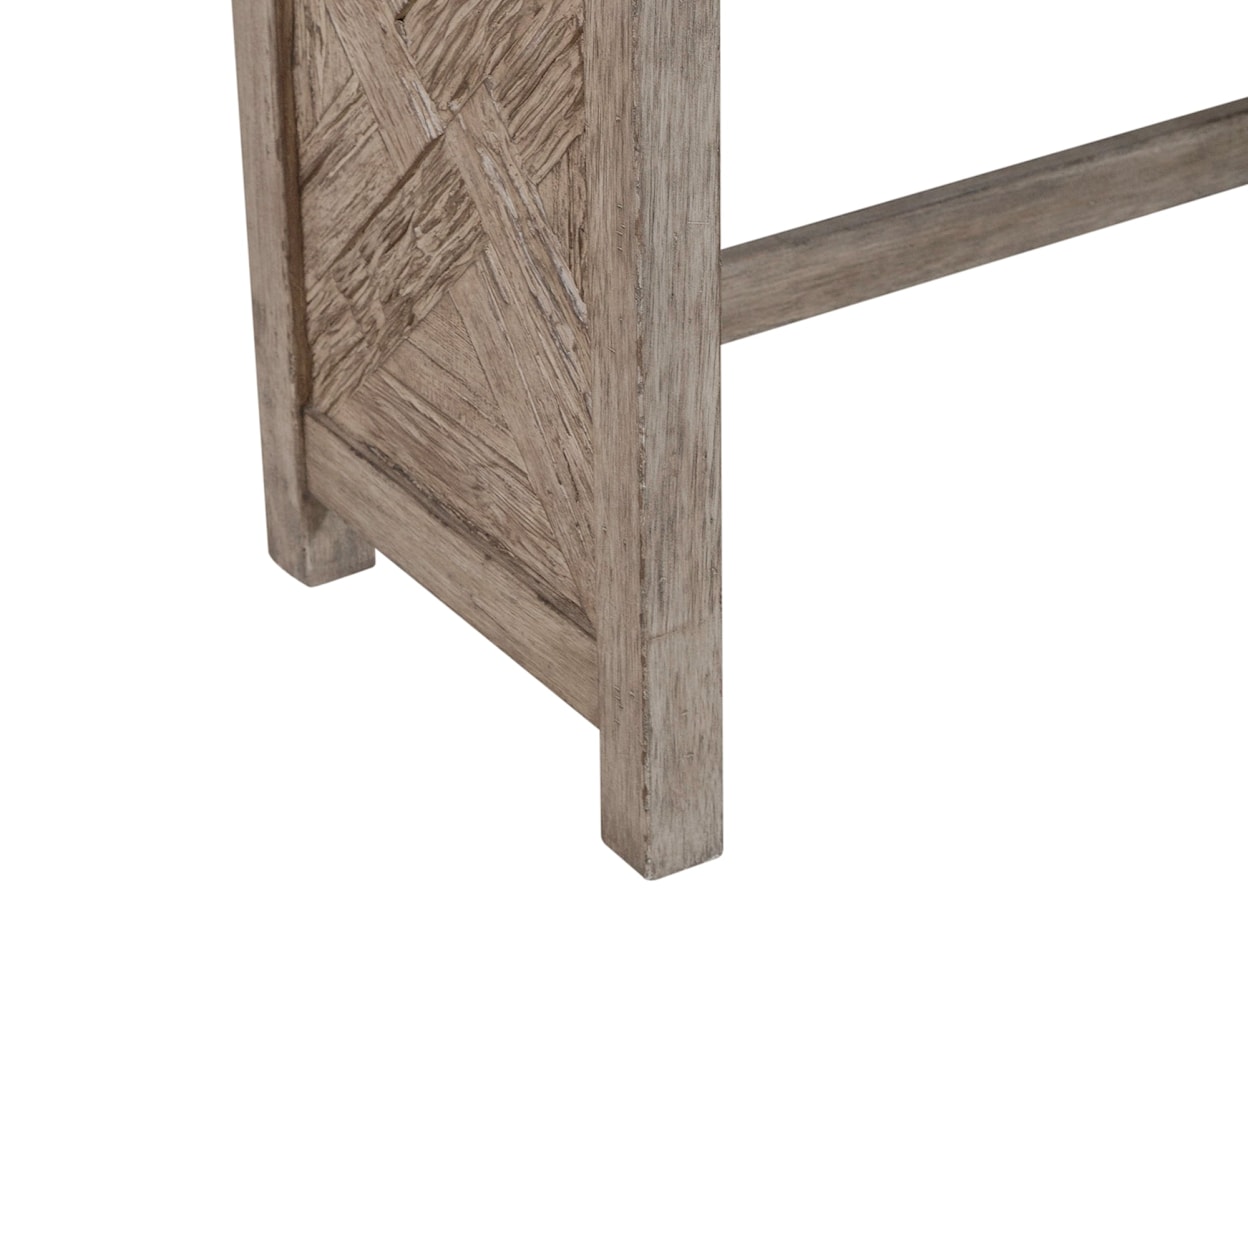 Liberty Furniture Skyview Lodge Console Counter-Height Table